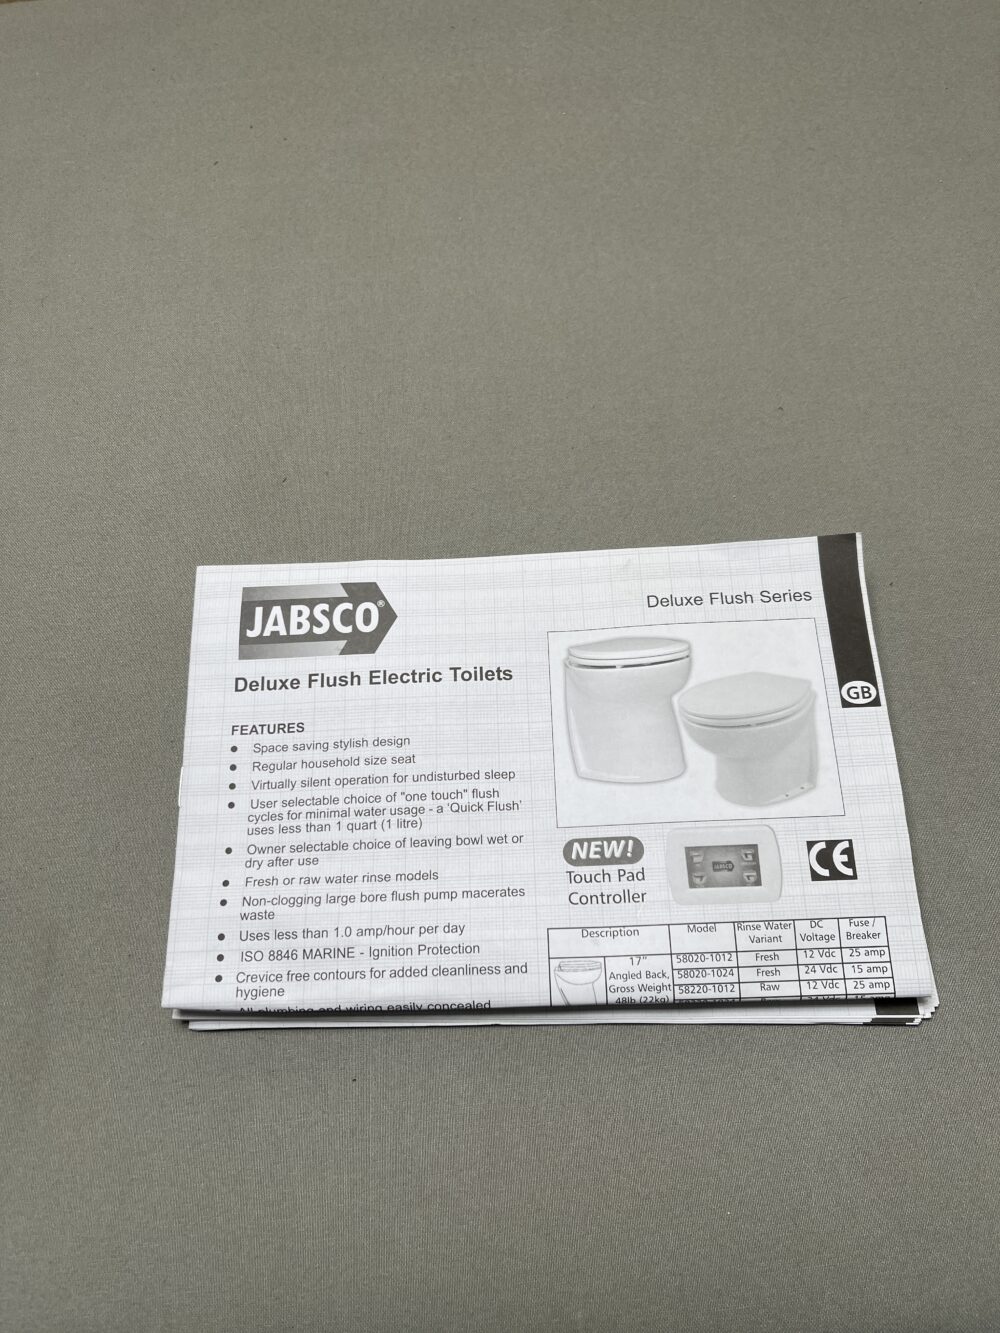 Jabsco Deluxe Flush Electric Toilets Touch Pad Controller 58020 inkl. 2/2 Wege Magnetventil